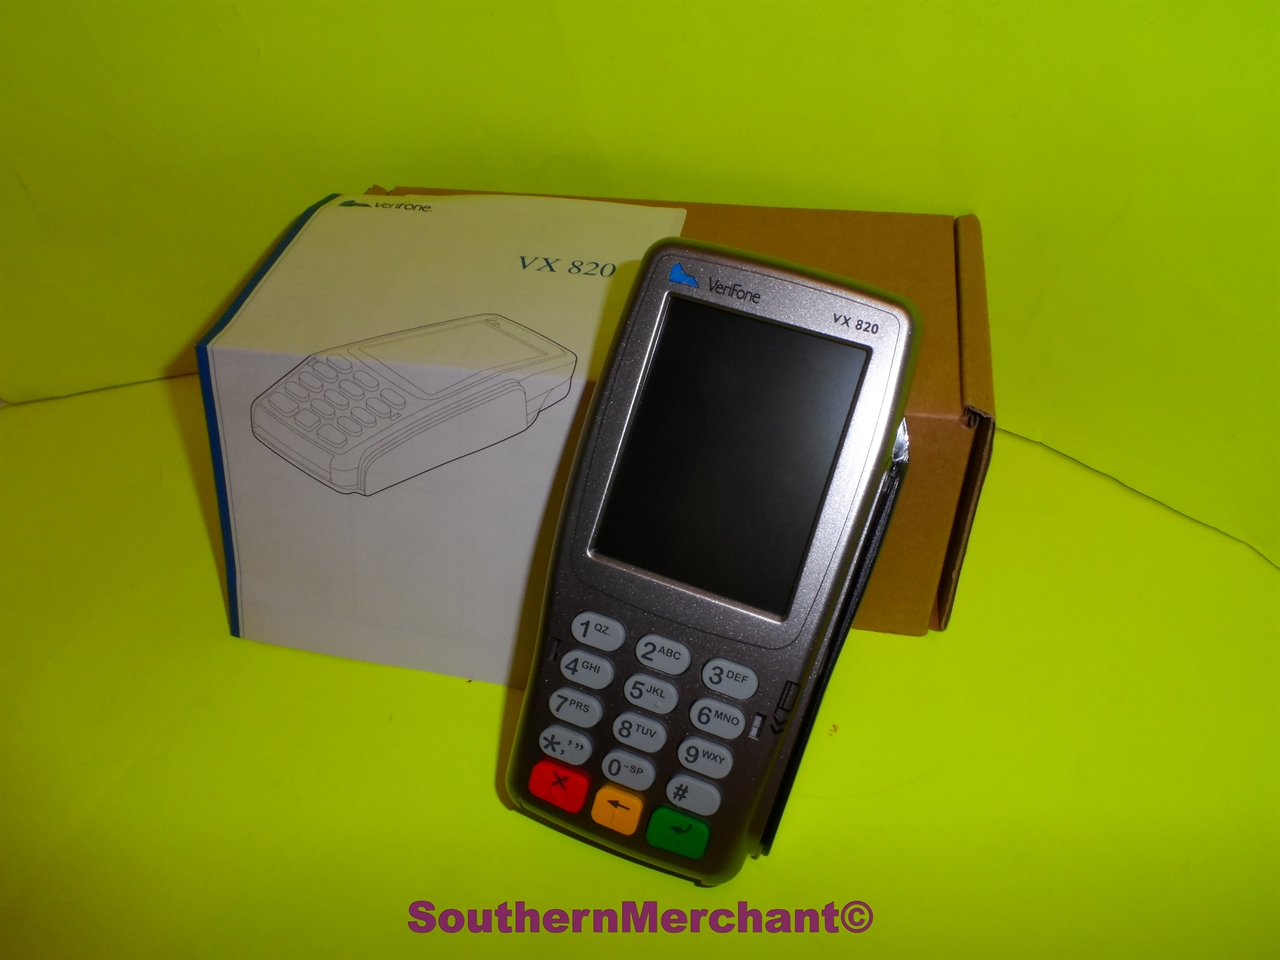 160Mb Verifone Vx820 v3.1 PIN Pad/Card Reader/SCR/Contactless 